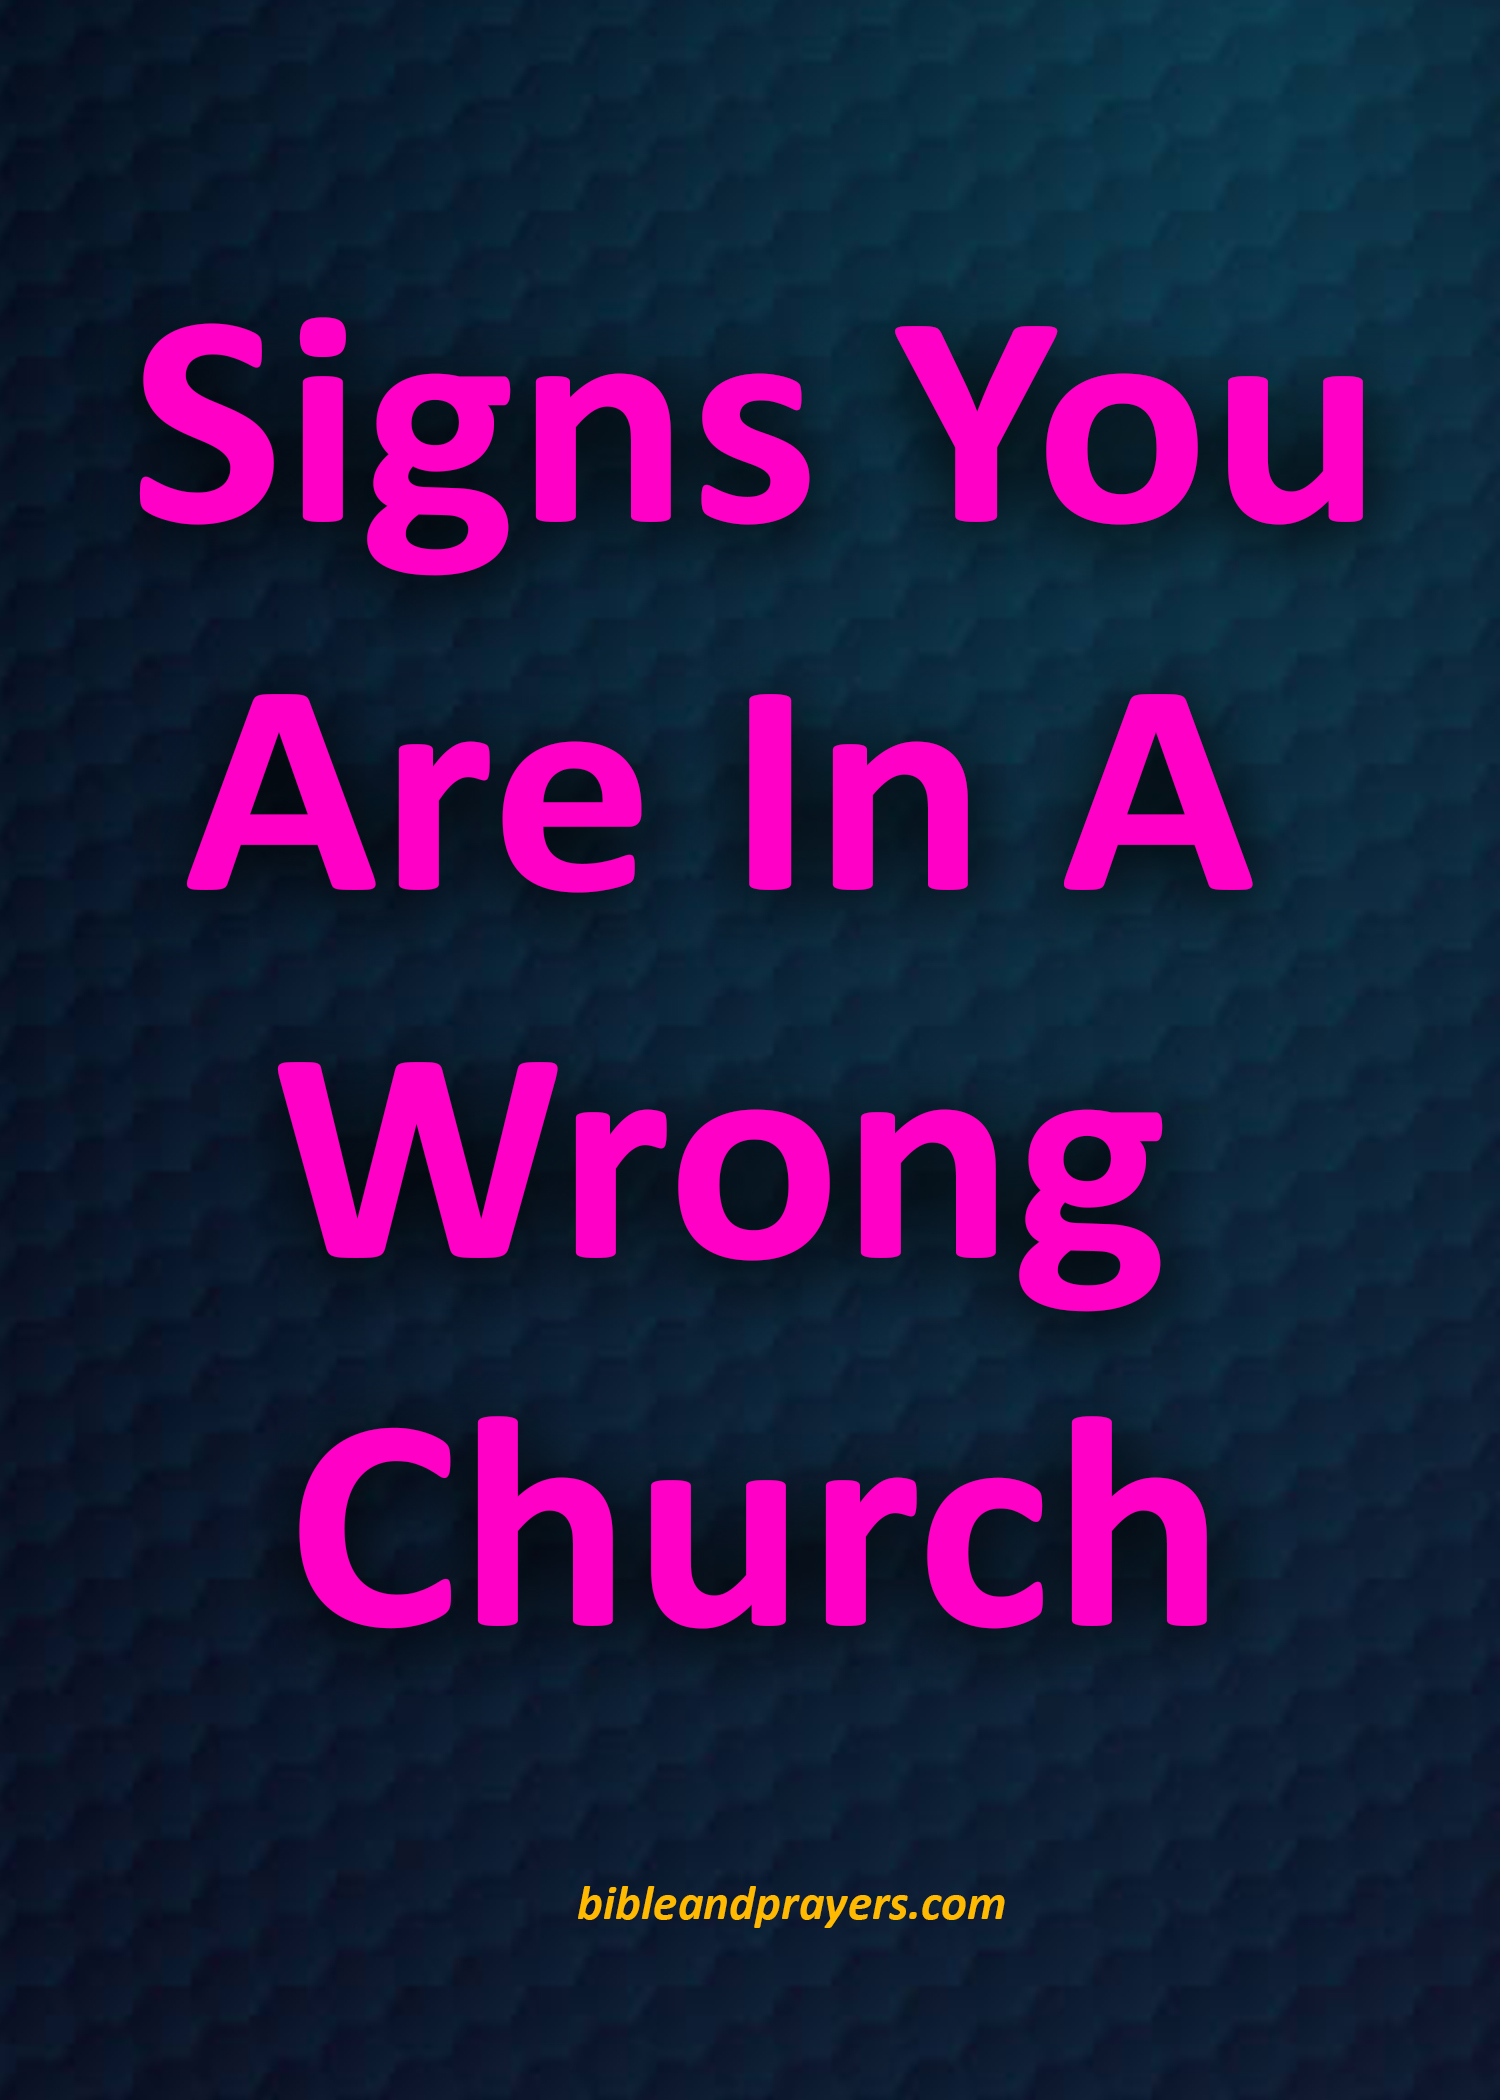 Signs You Are In A Wrong Church